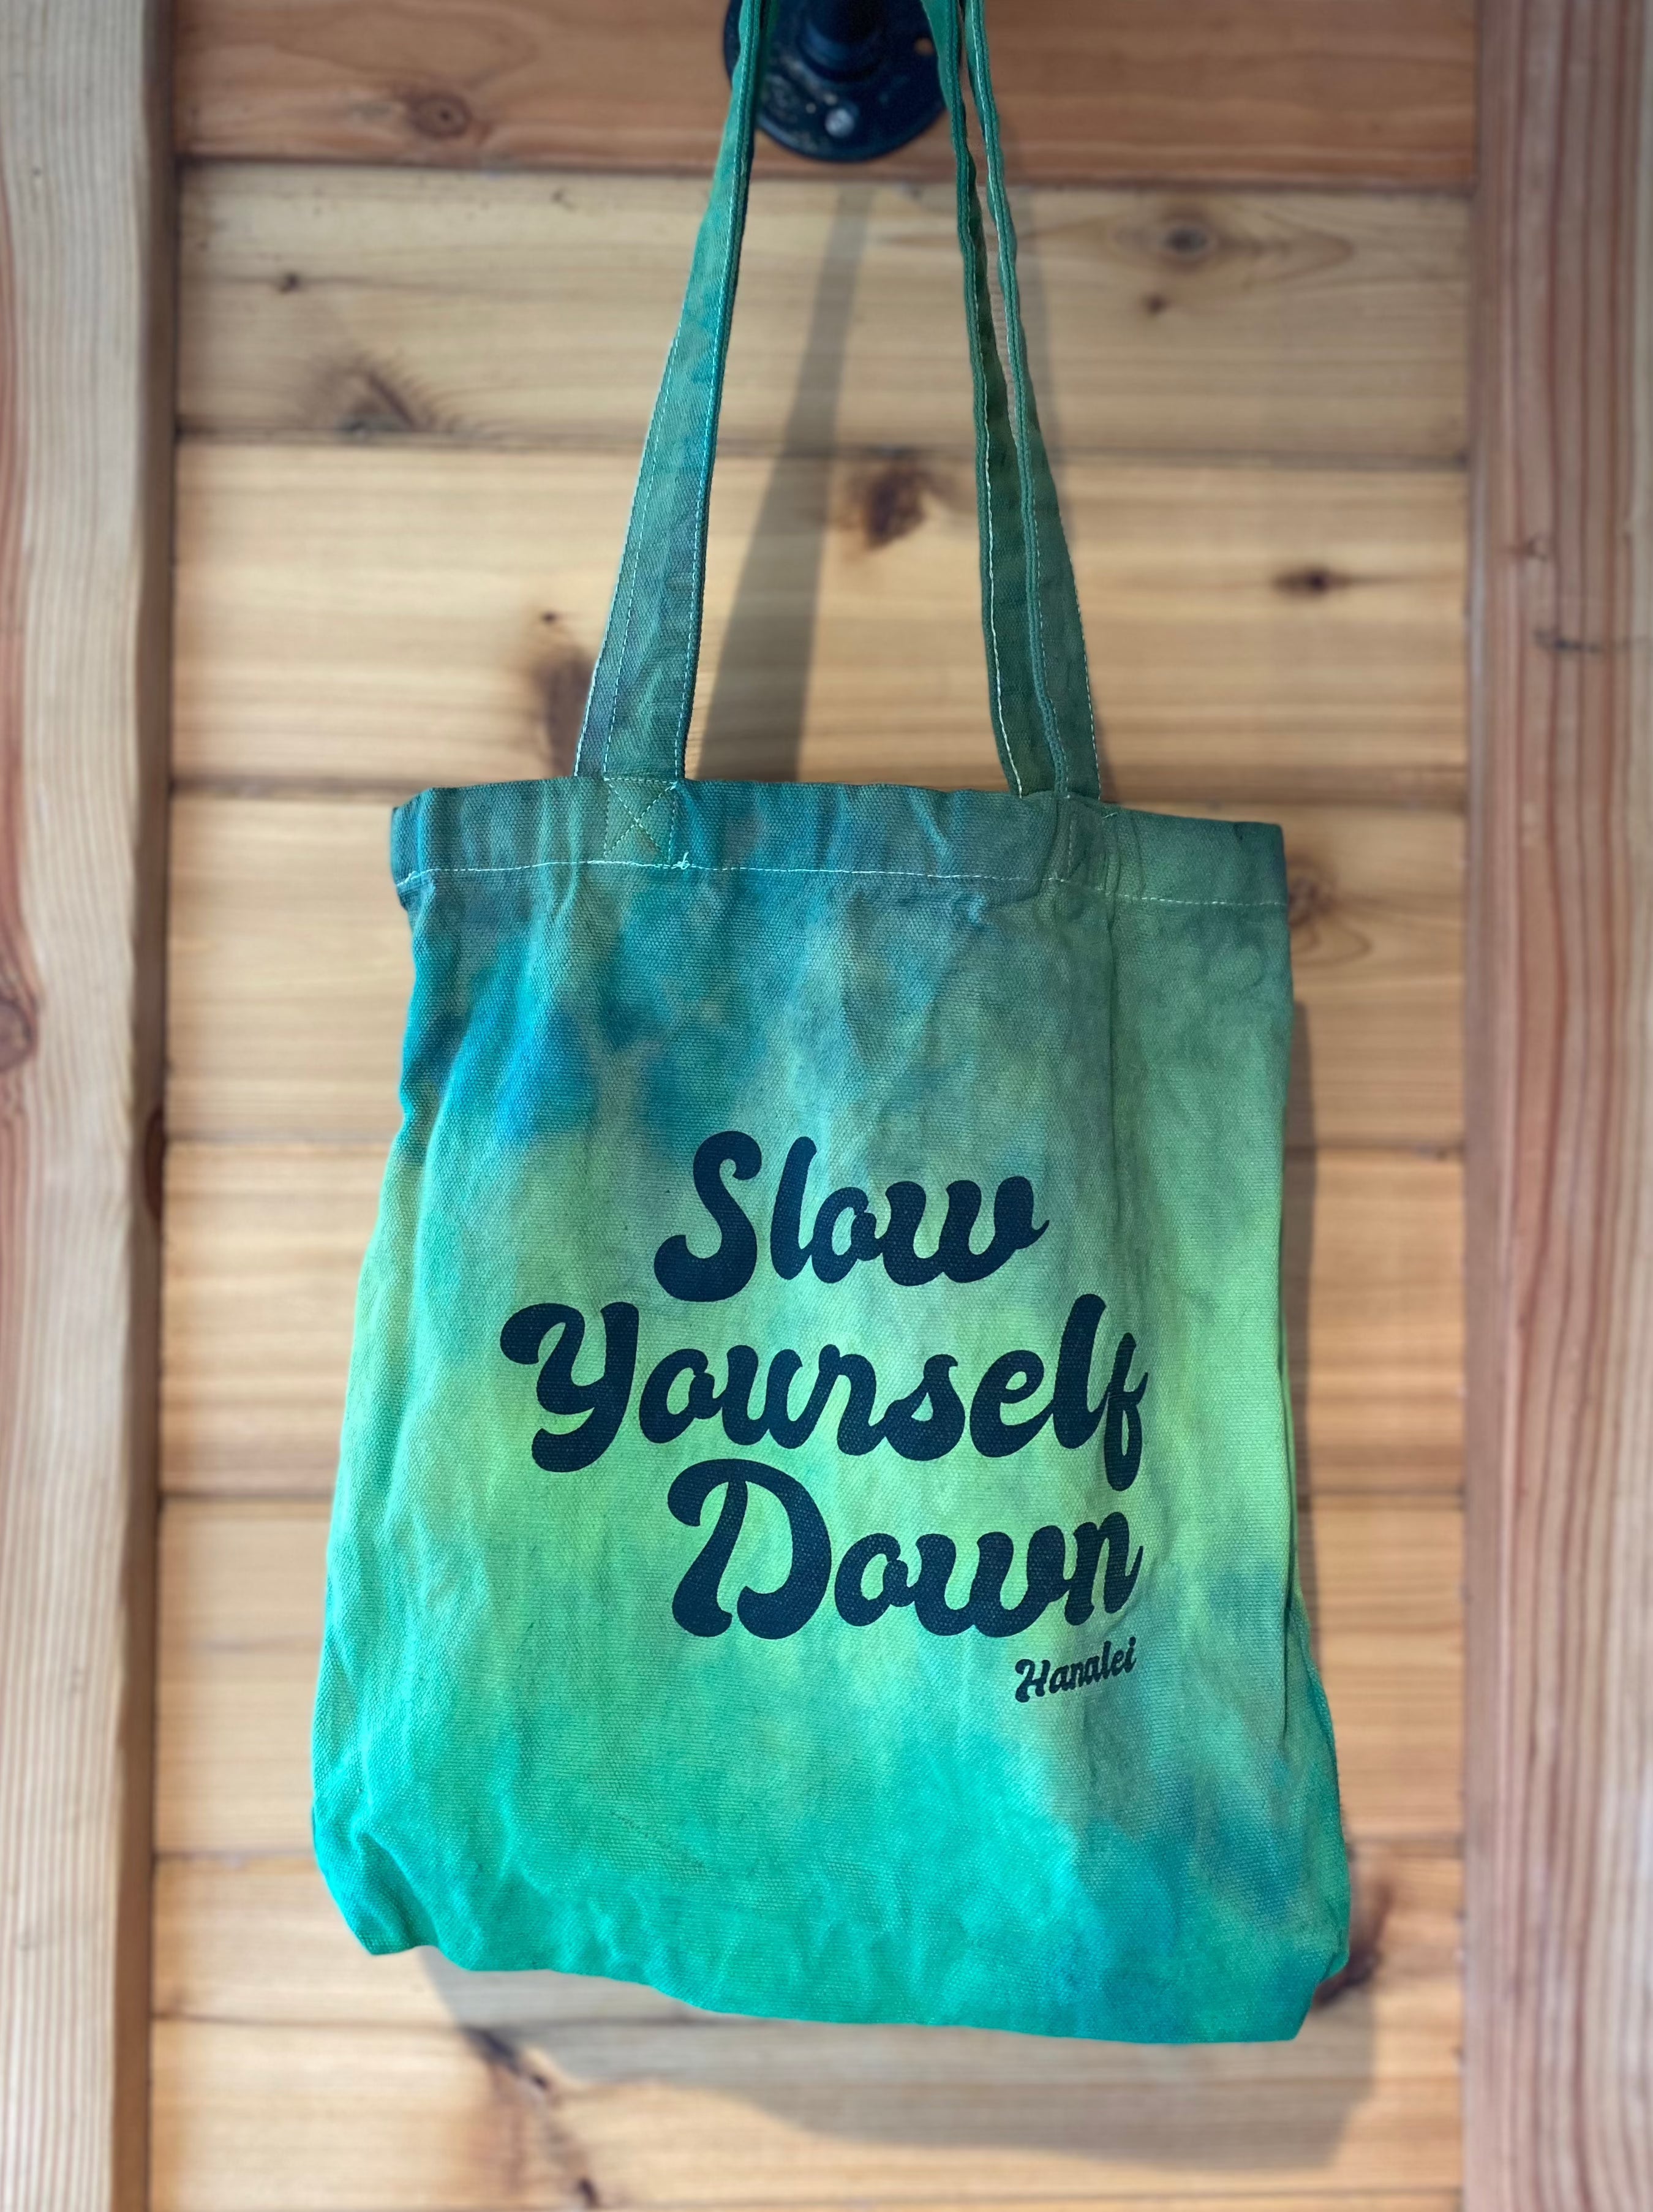 Locally Tie Dyed Tote Bags Totebags - Slow Yourself Down